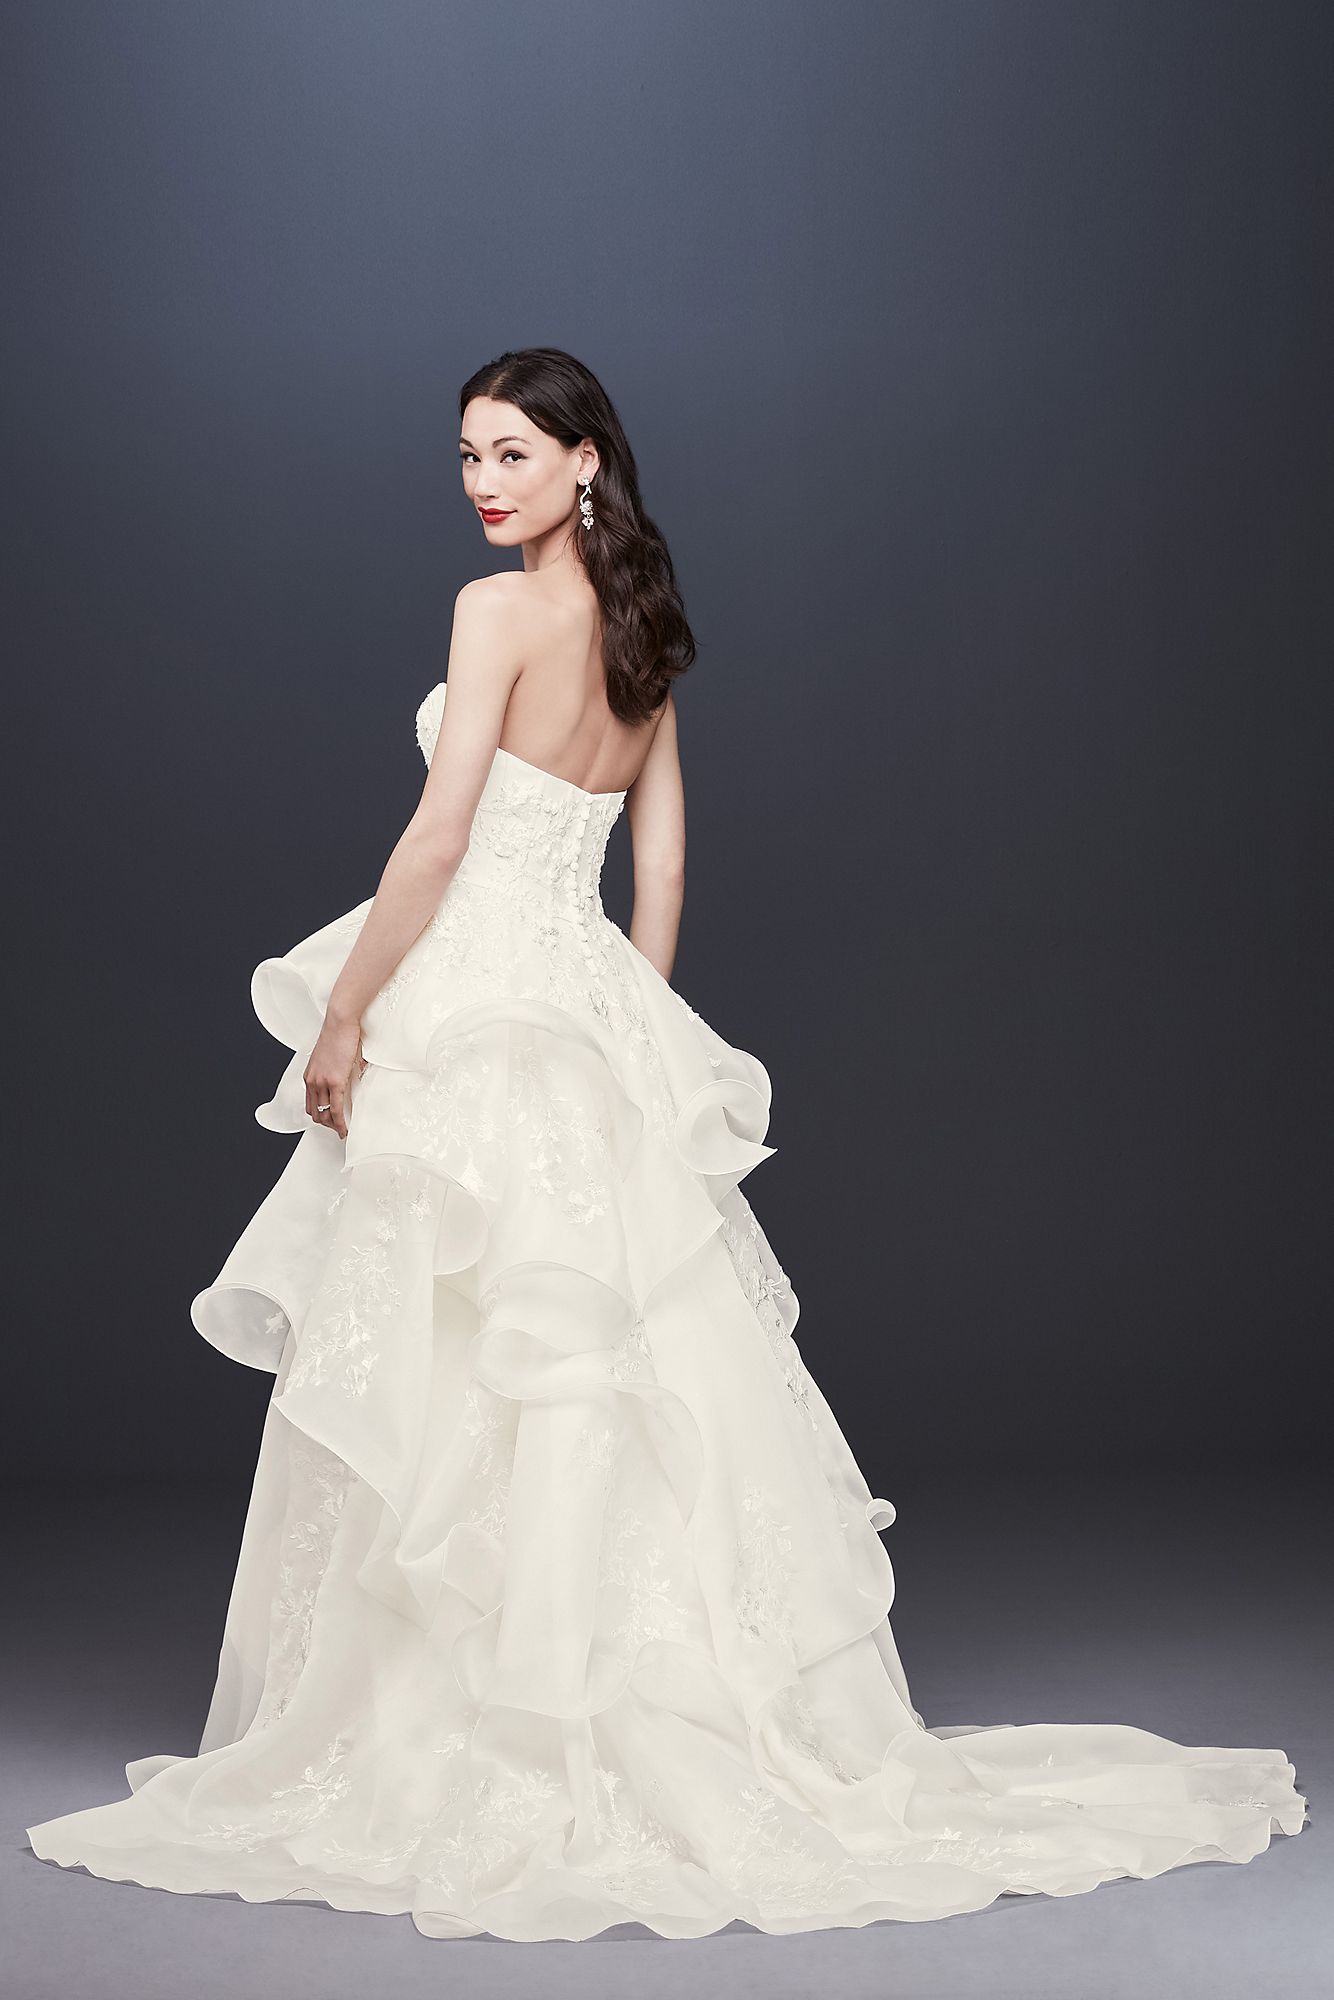 Floral Applique Wedding Dress with Tiered Skirt CWG822